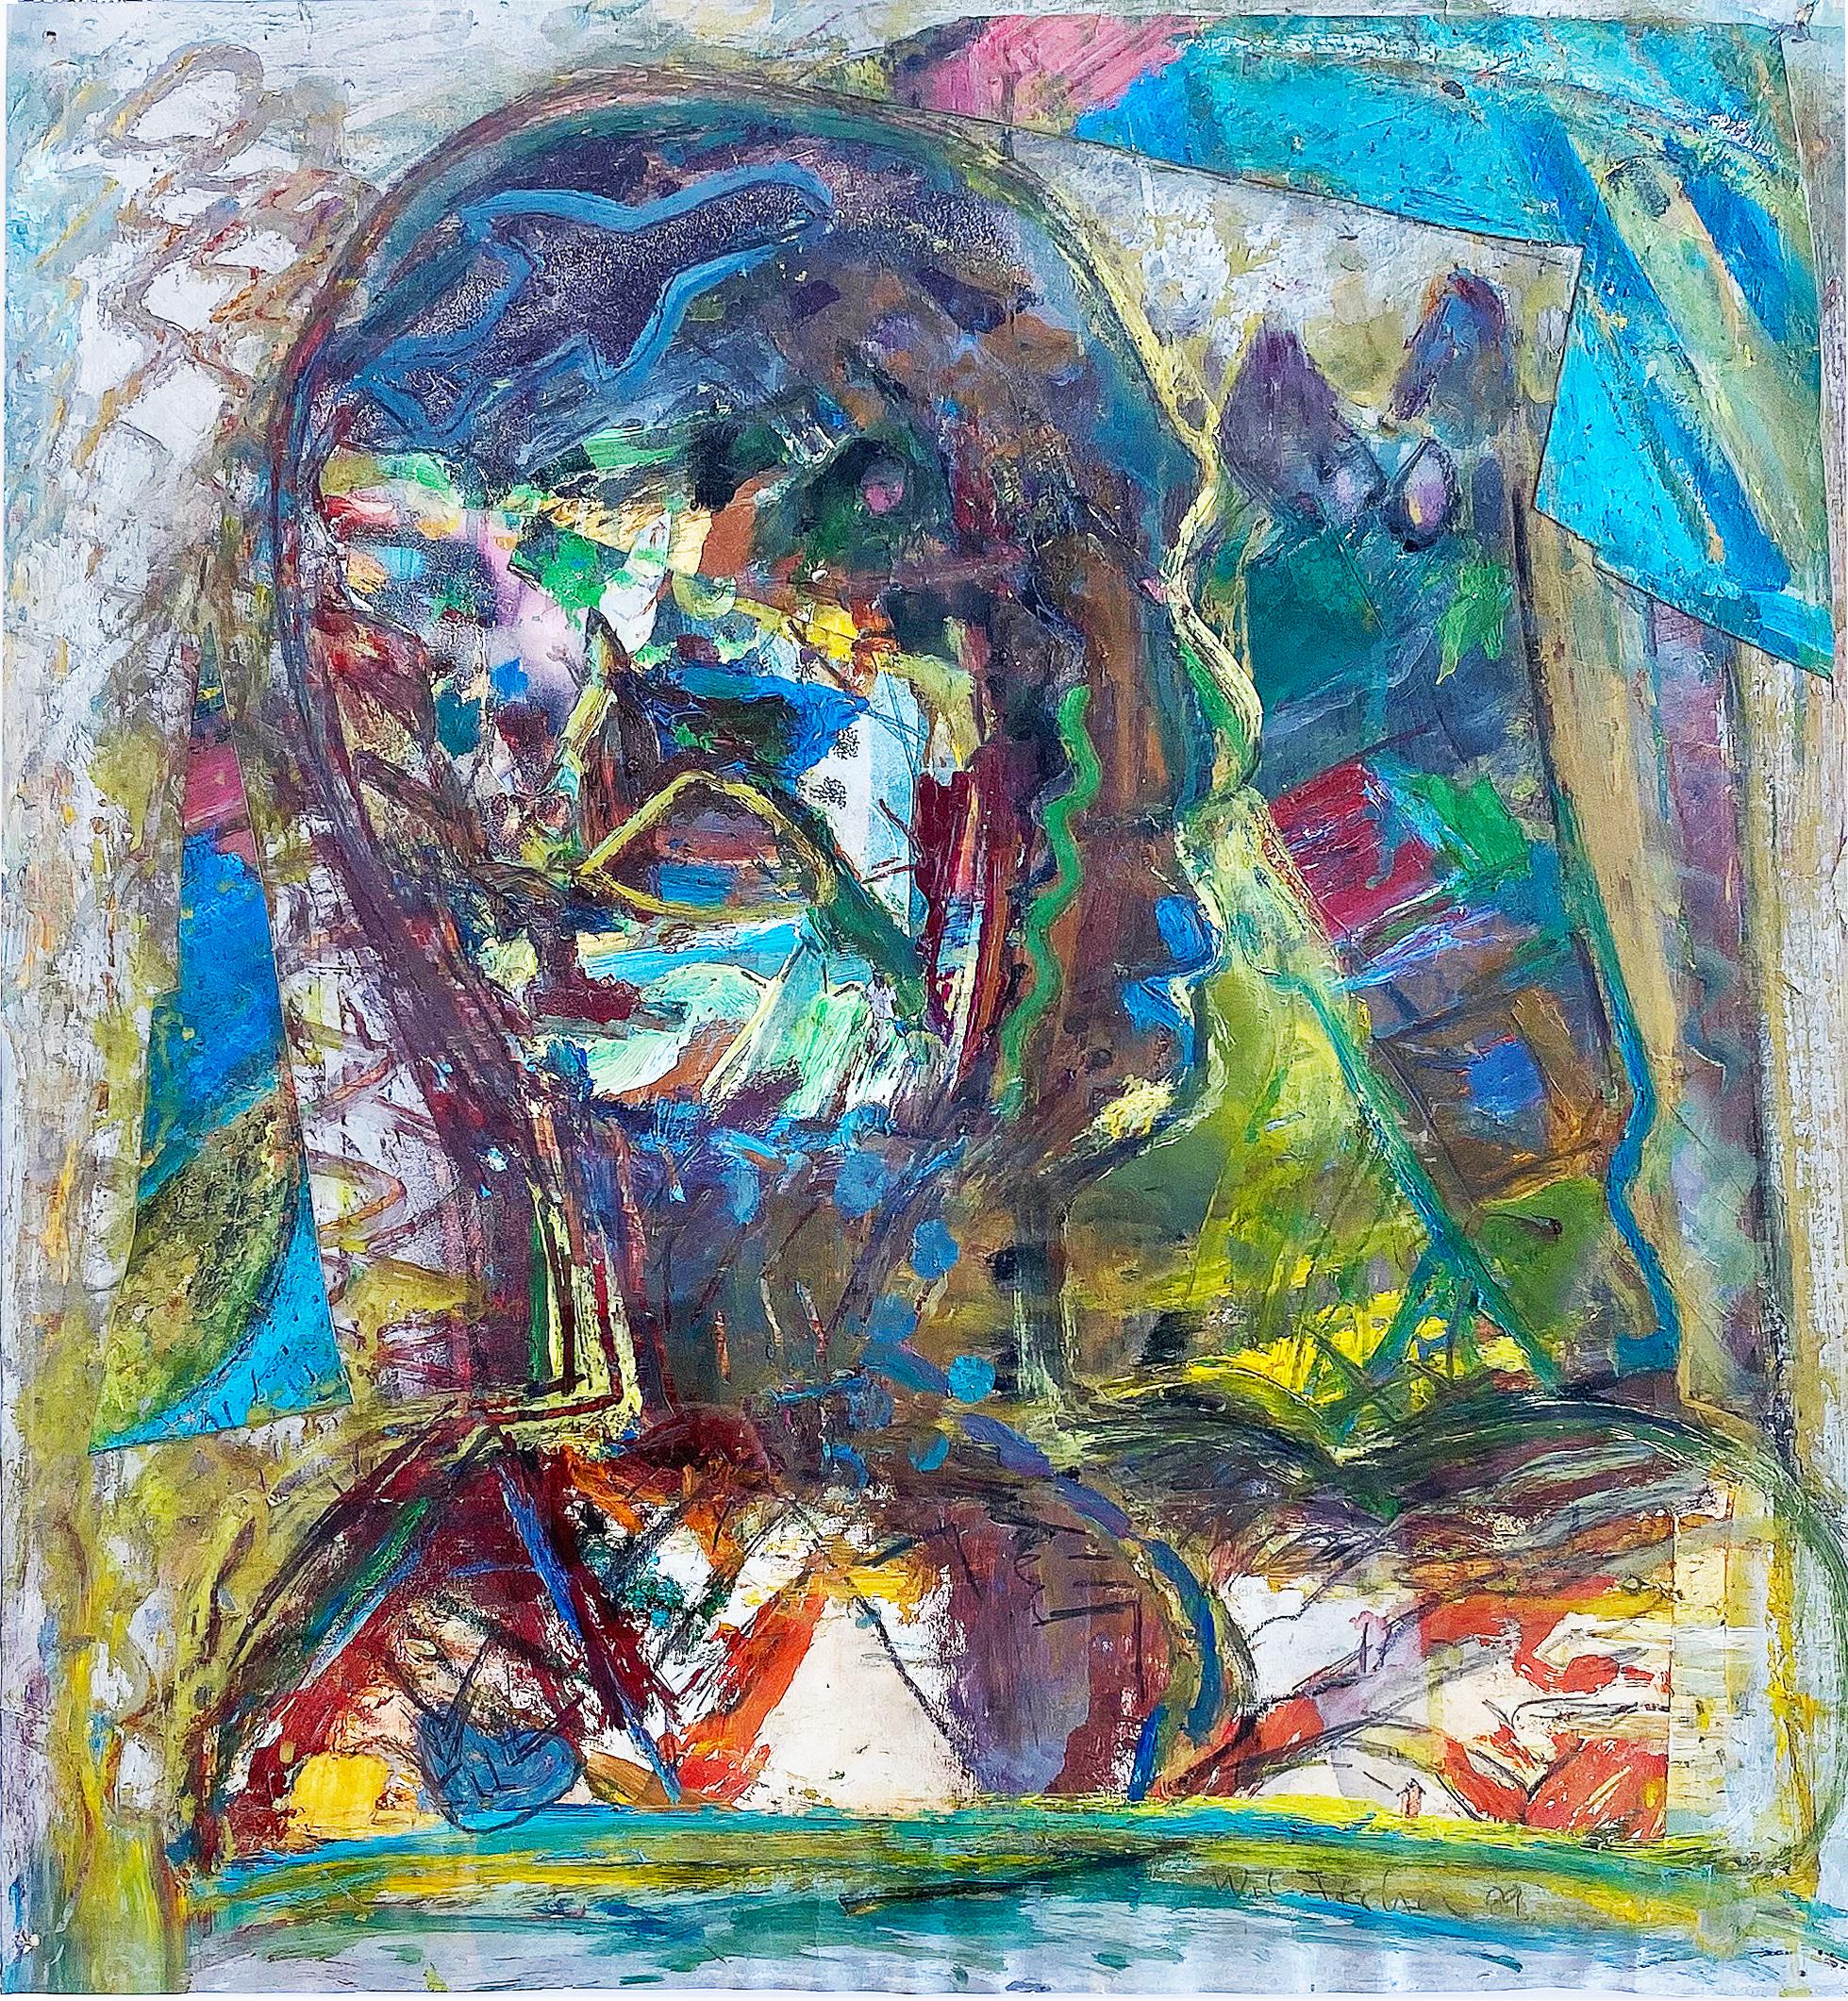 Original Figurative Abstract Painting by Warren Fischer, 1989

Offered for sale is a colorful figurative abstract acrylic painting on paper by Warren Fischer. The painting is signed and dated in the lower right corner. It is displayed in a